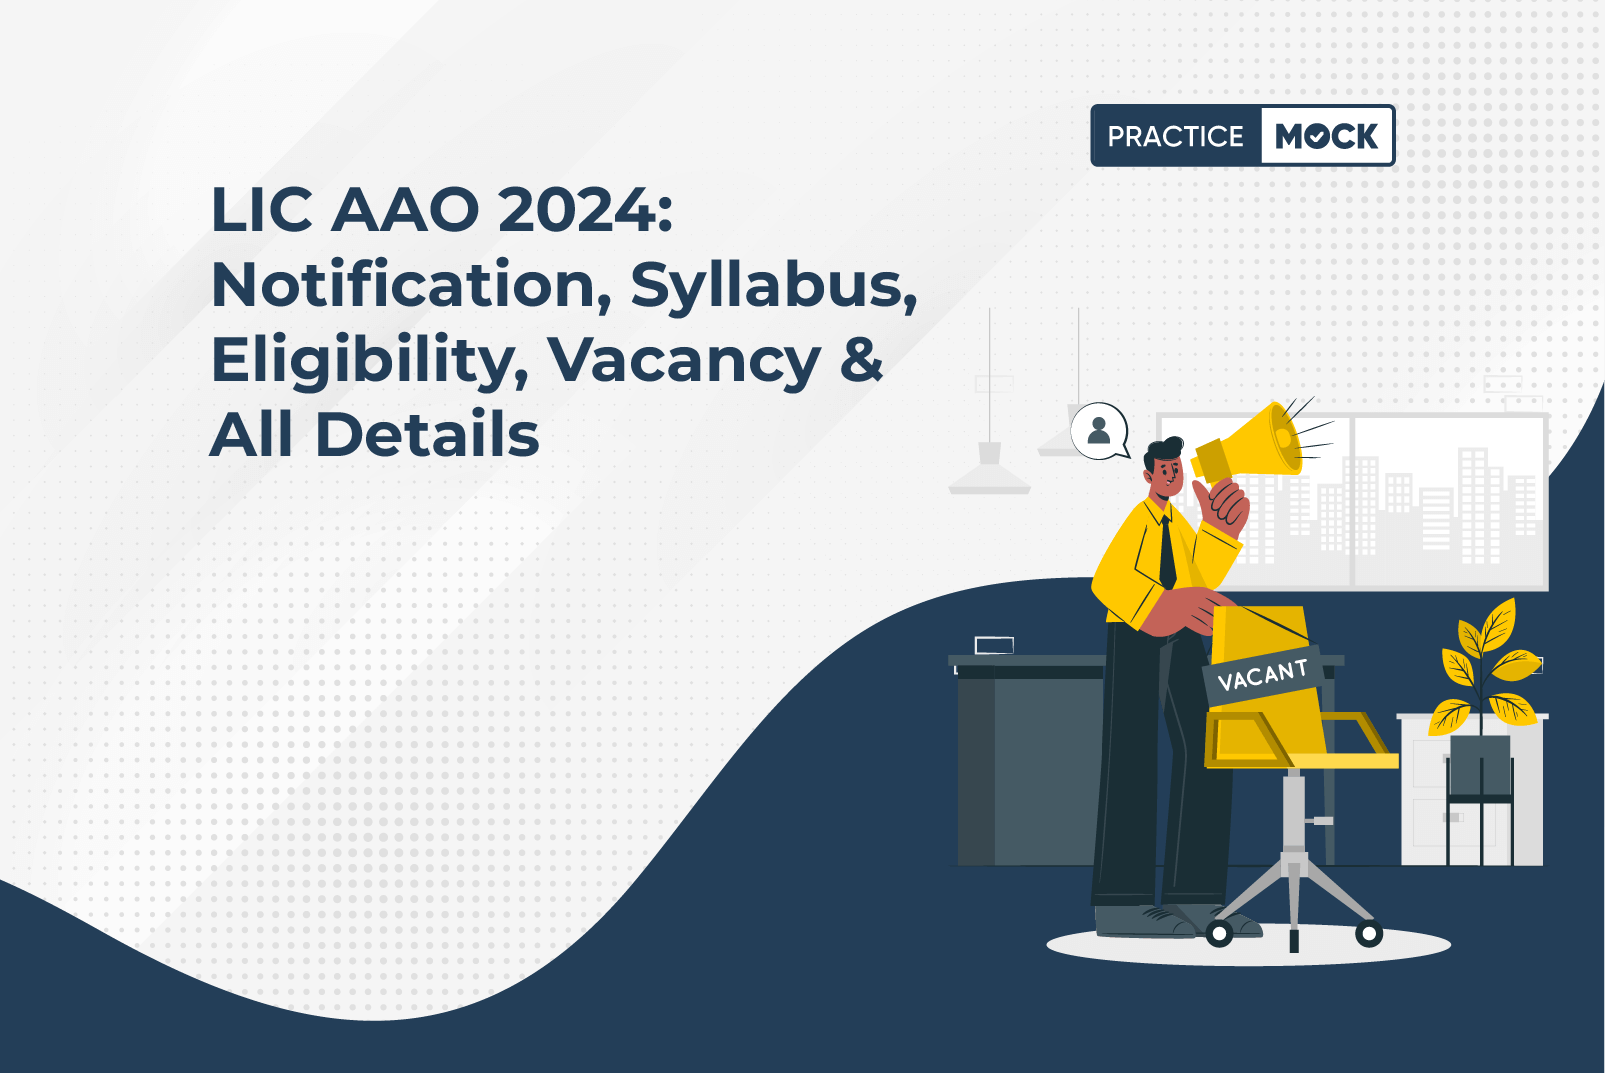 LIC AAO 2024 Notification, Syllabus, Eligibility, Vacancy & All Details